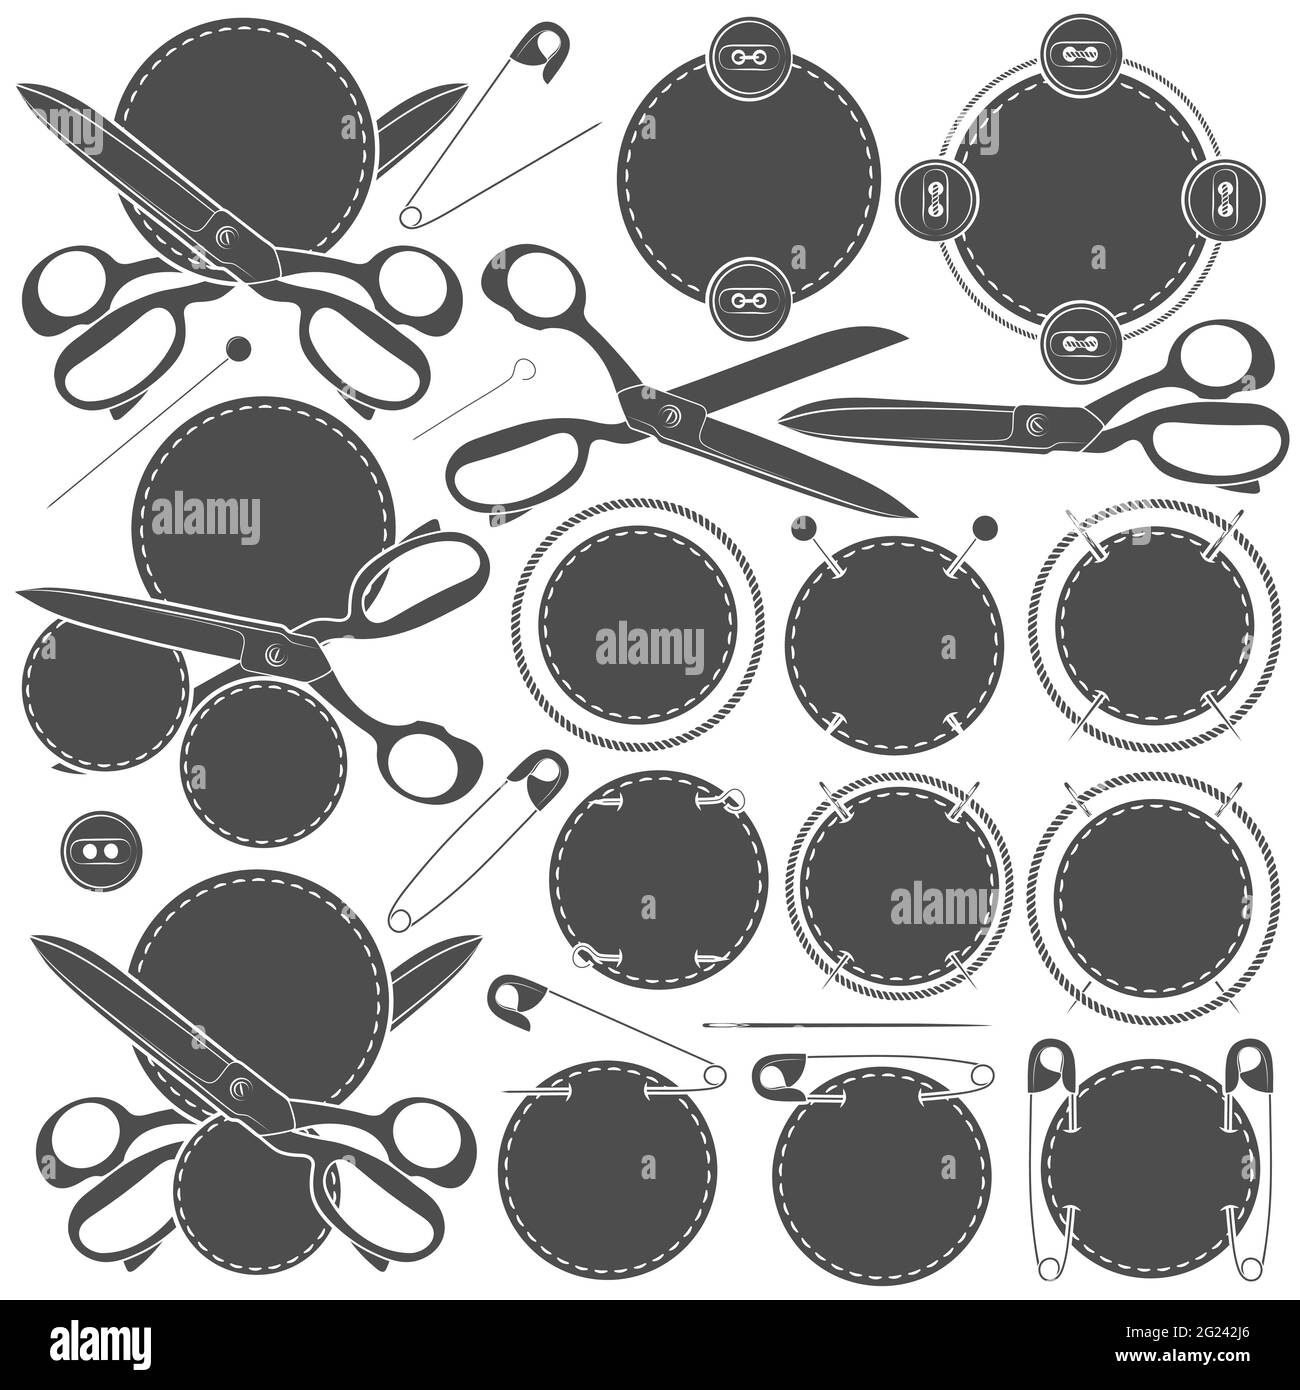 Set of vector signs with sewing accessories. Isolated objects on a white background. Stock Vector